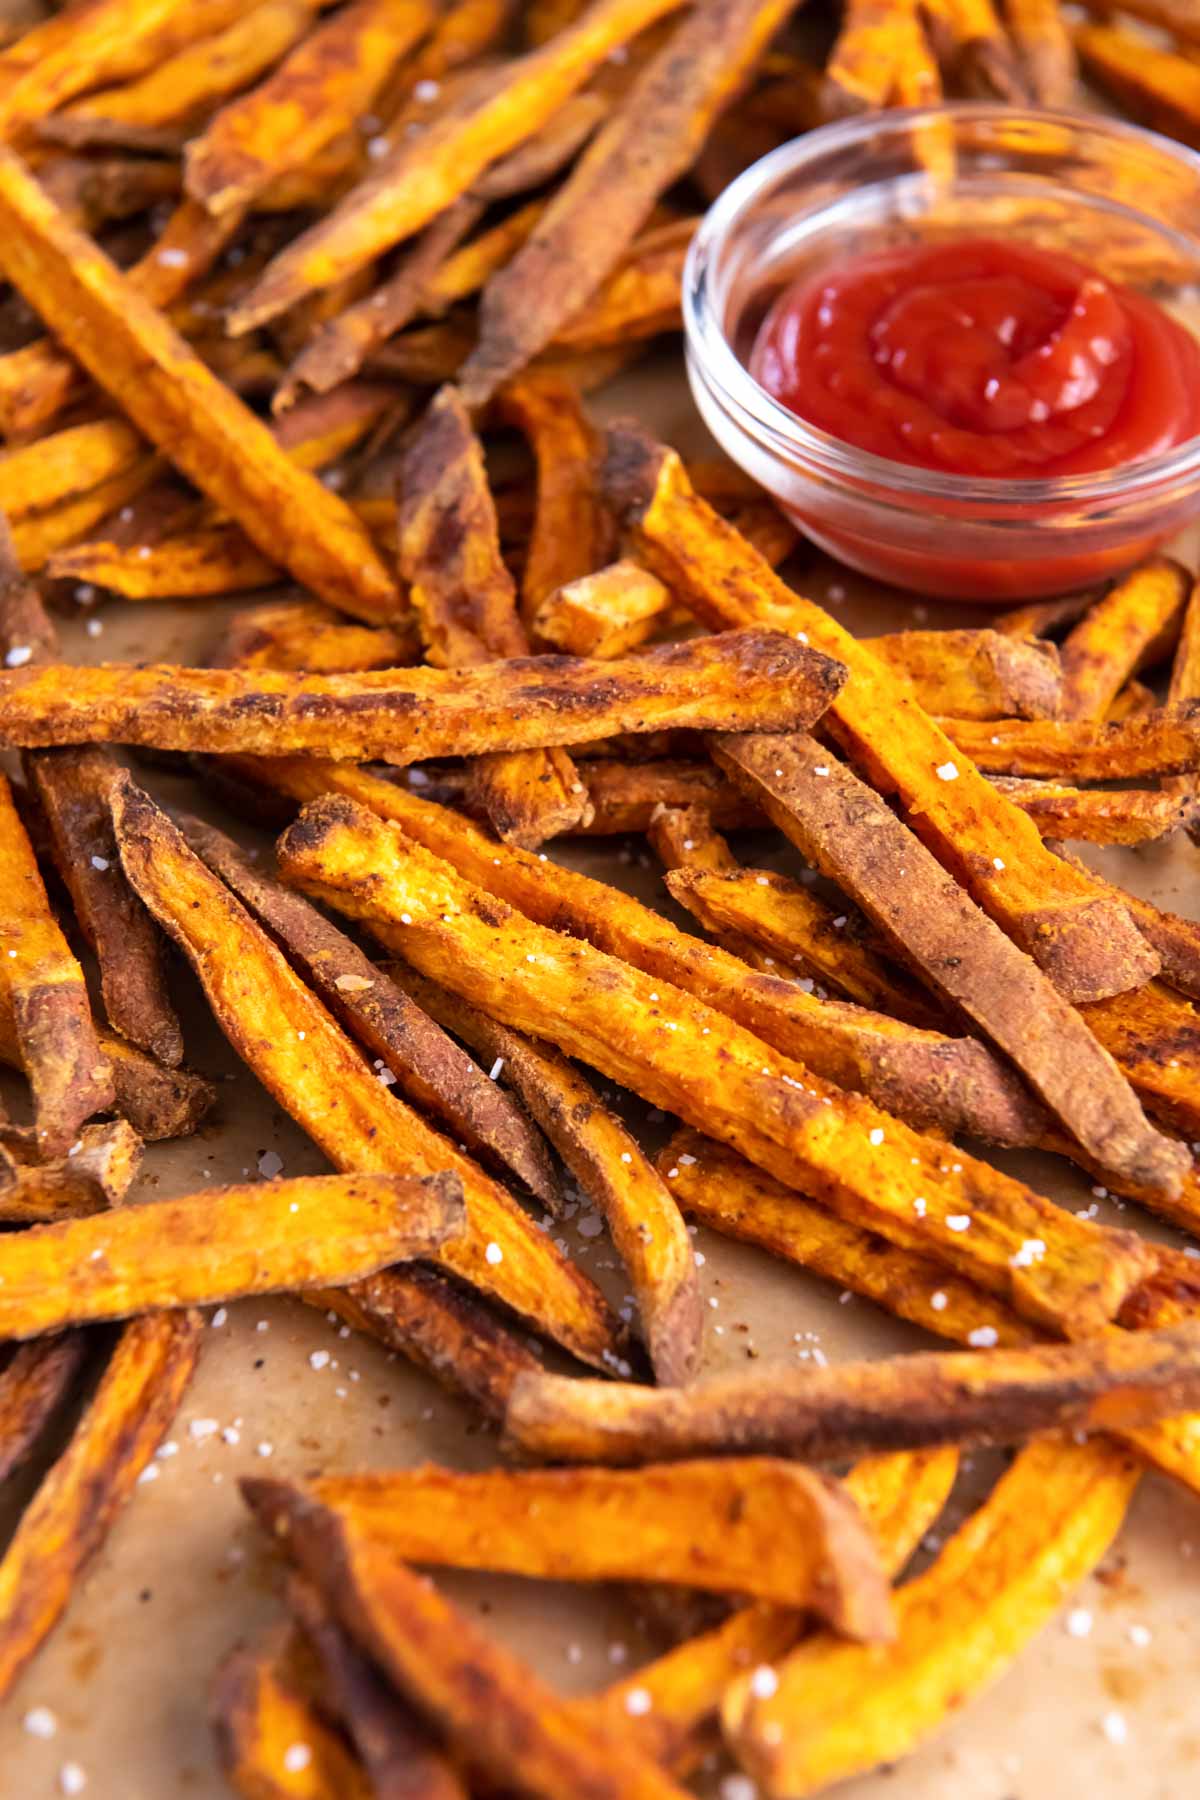 Baked sweet potato fries served with ketchup.